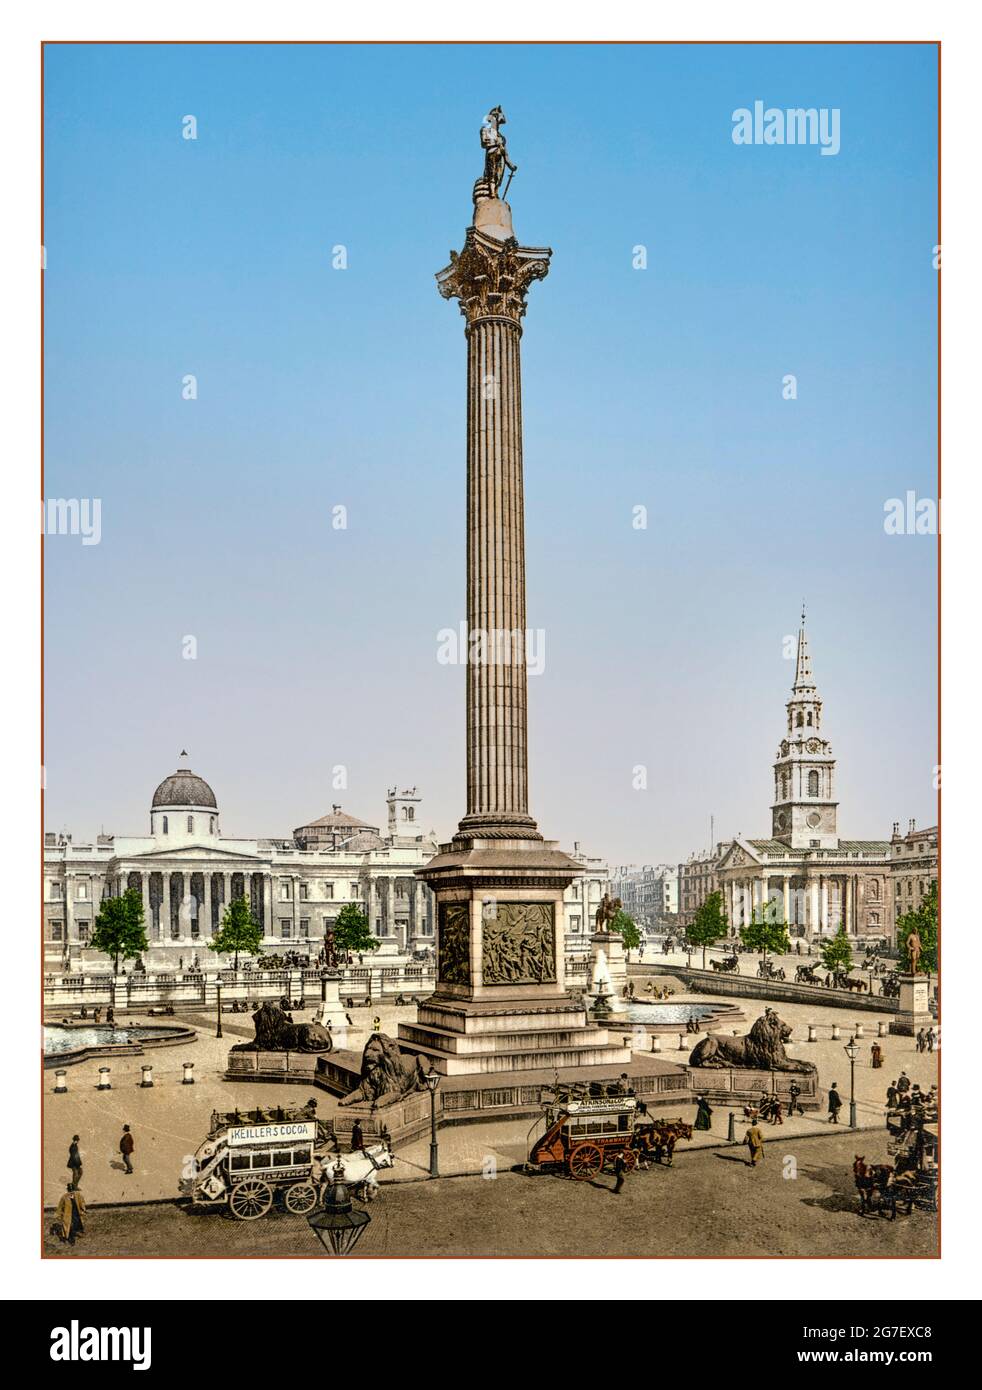 VICTORIAN LONDON [Trafalgar Square National Gallery & Saint Martin in the Fields Church, London, England] NELSONS COLUMN TRAFALGAR SQUARE 1900 Victorian London. Trafalgar Square Date Created/Published: [ca. 1890-1906] color photochrom Horse drawn buses carriages taxis Stock Photo